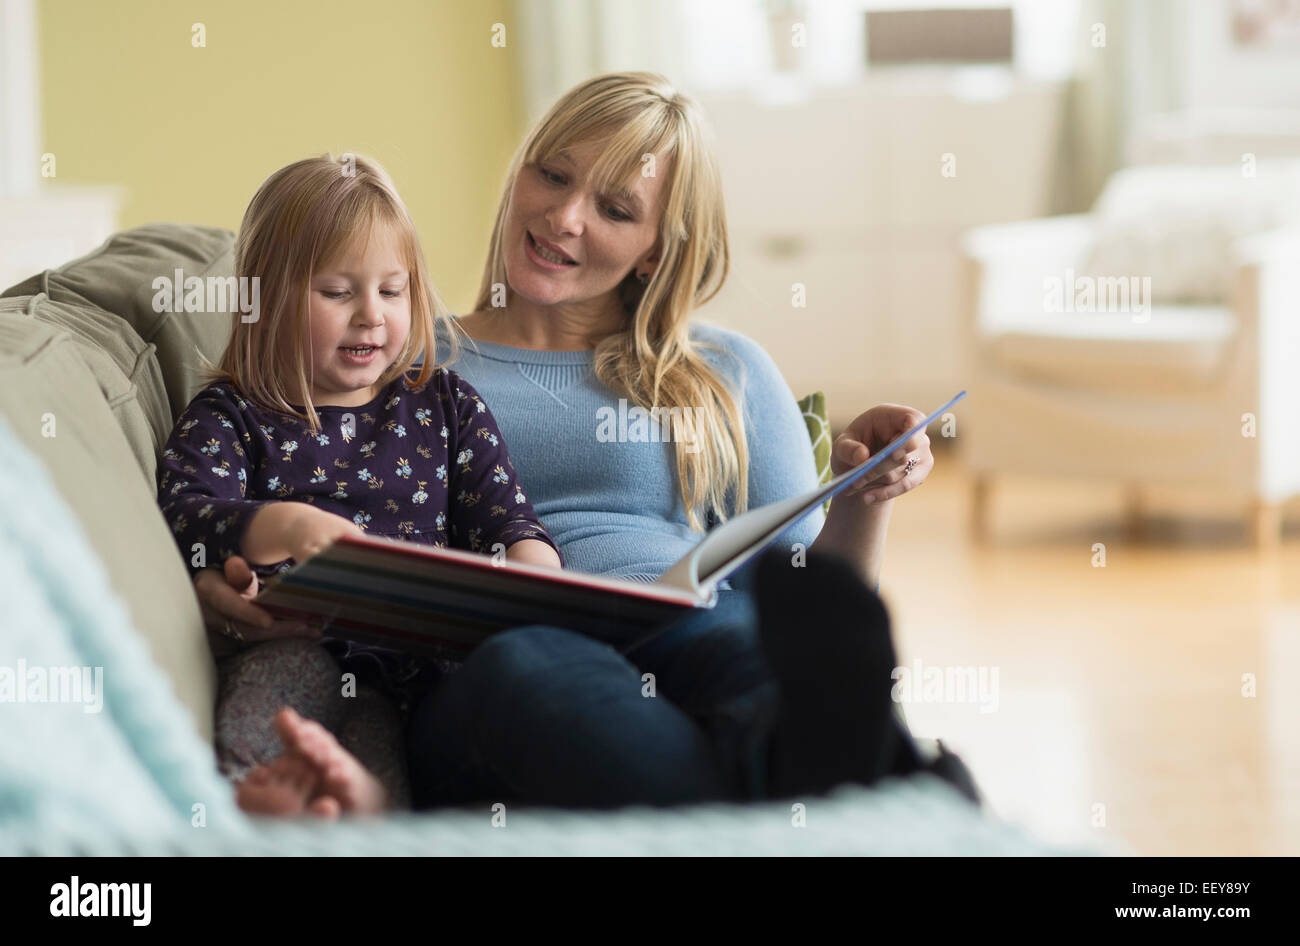 Mother and daughter (4-5) sitting on couch and reading book Stock Photo